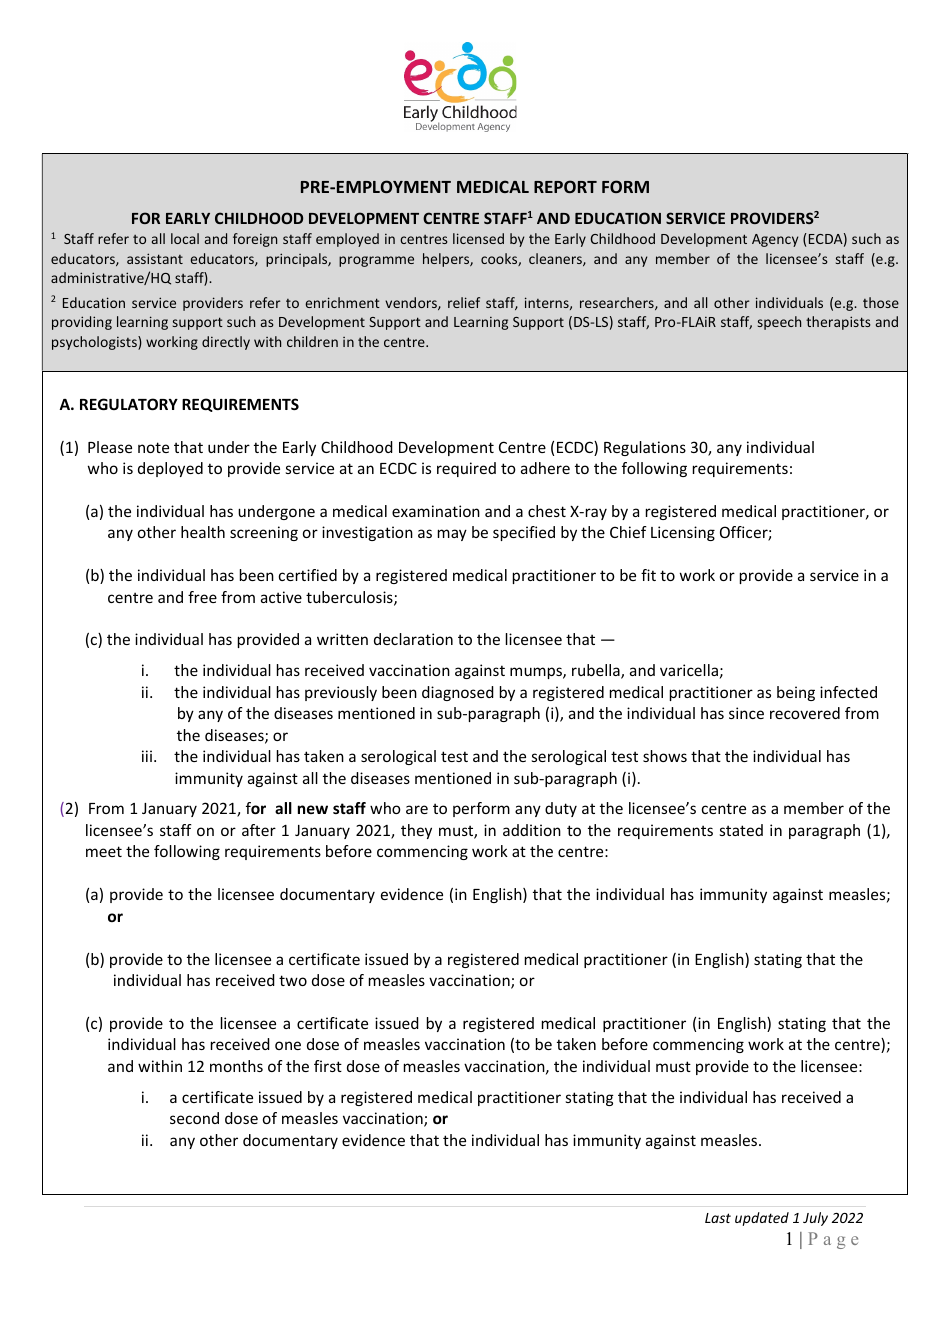 Pre-employment Medical Report Form for Early Childhood Development Centre Staff and Education Service Providers - Singapore, Page 1